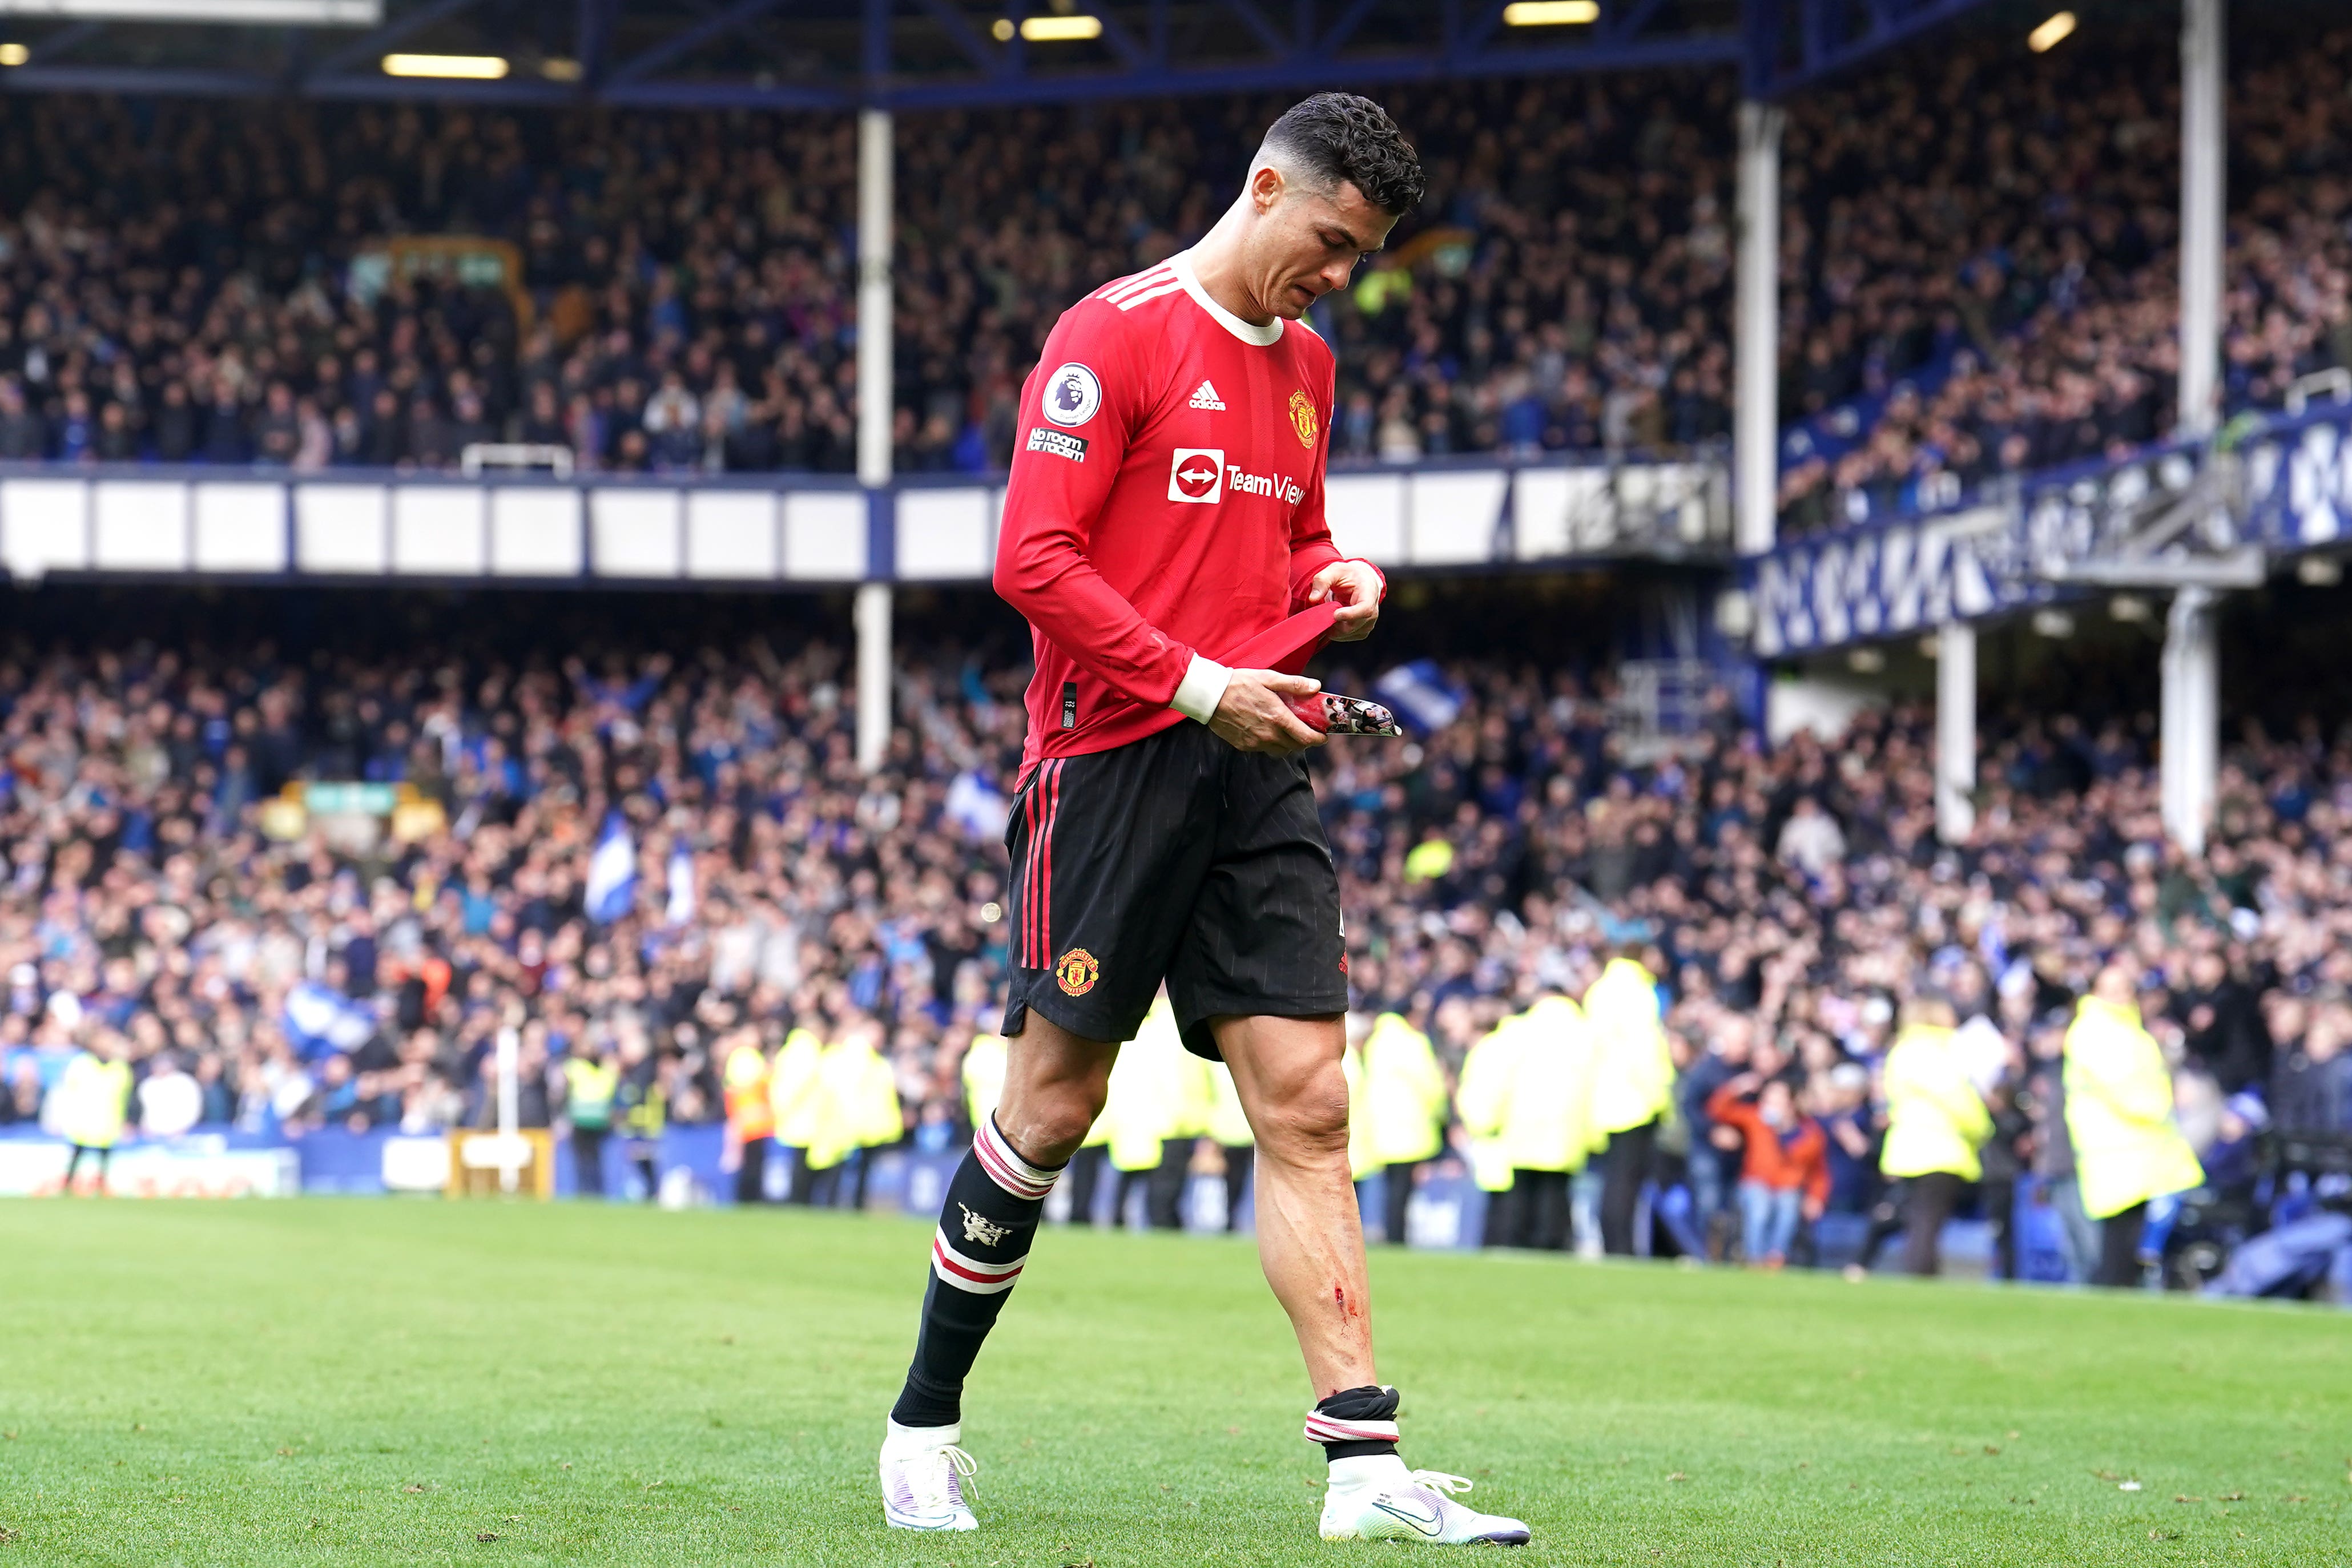 Cristiano Ronaldo has been handed a two-game ban following an incident at Everton in April (Martin Rickett/PA)